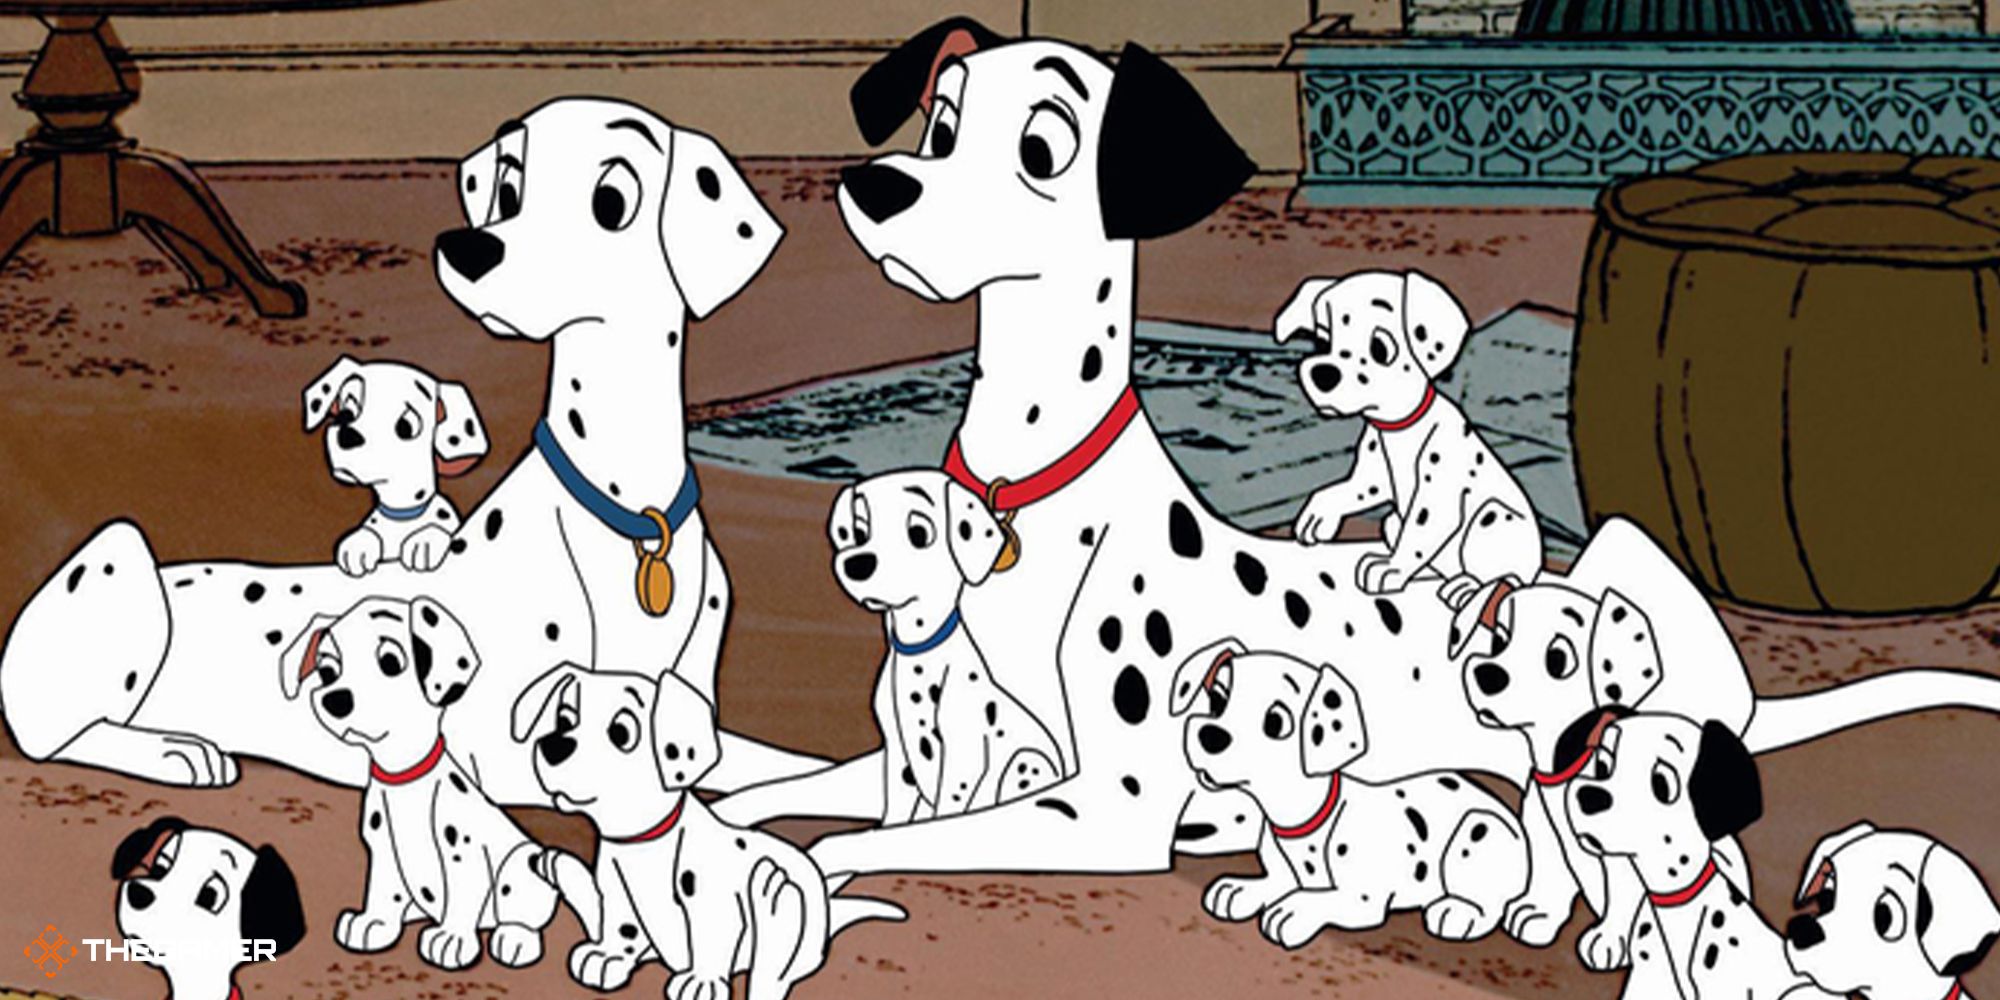 9 of the pups sat with their parents in 101 Dalmatians